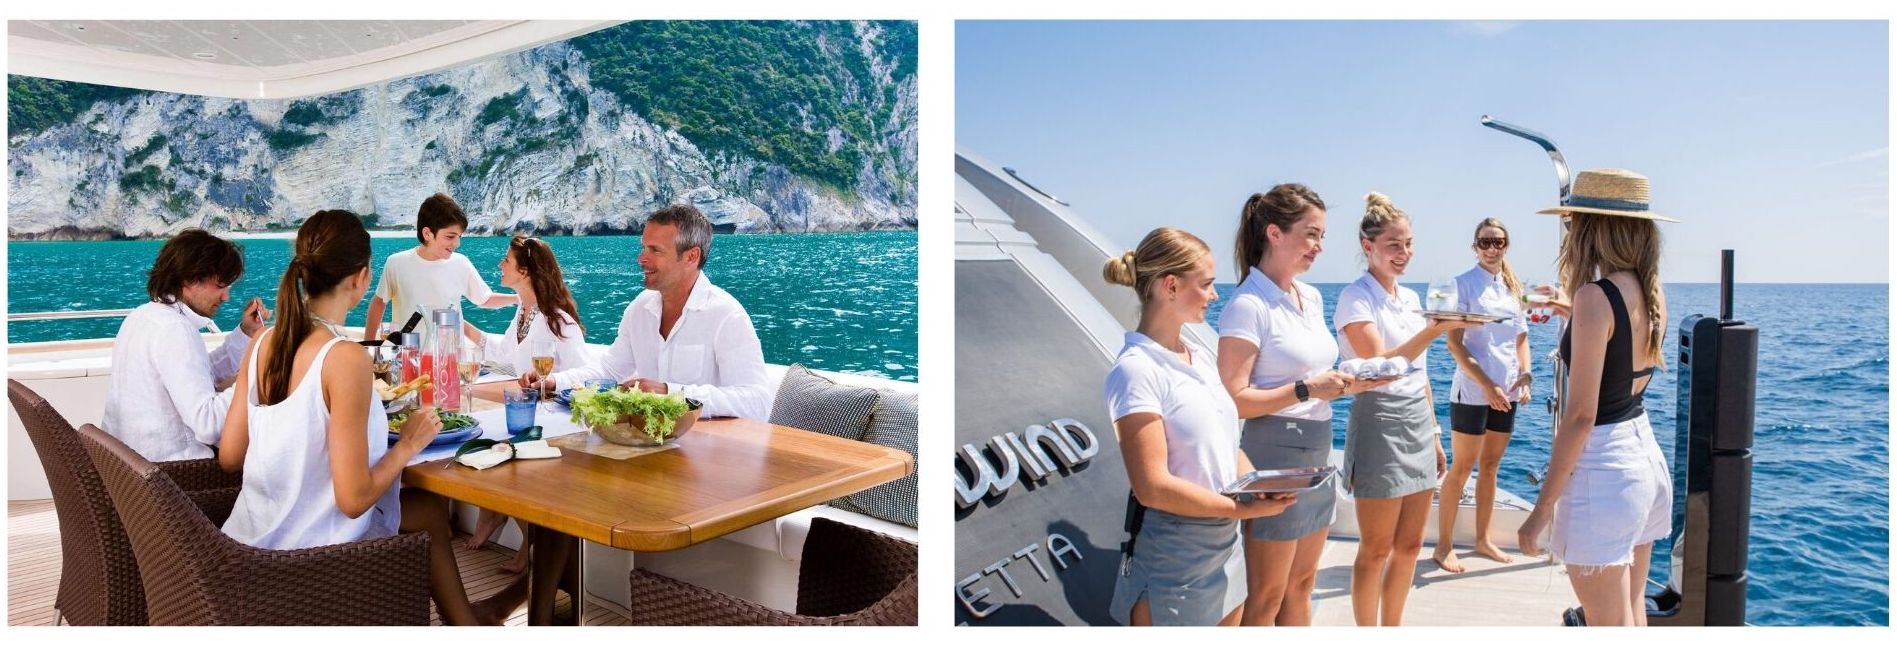 standard tip for yacht charter